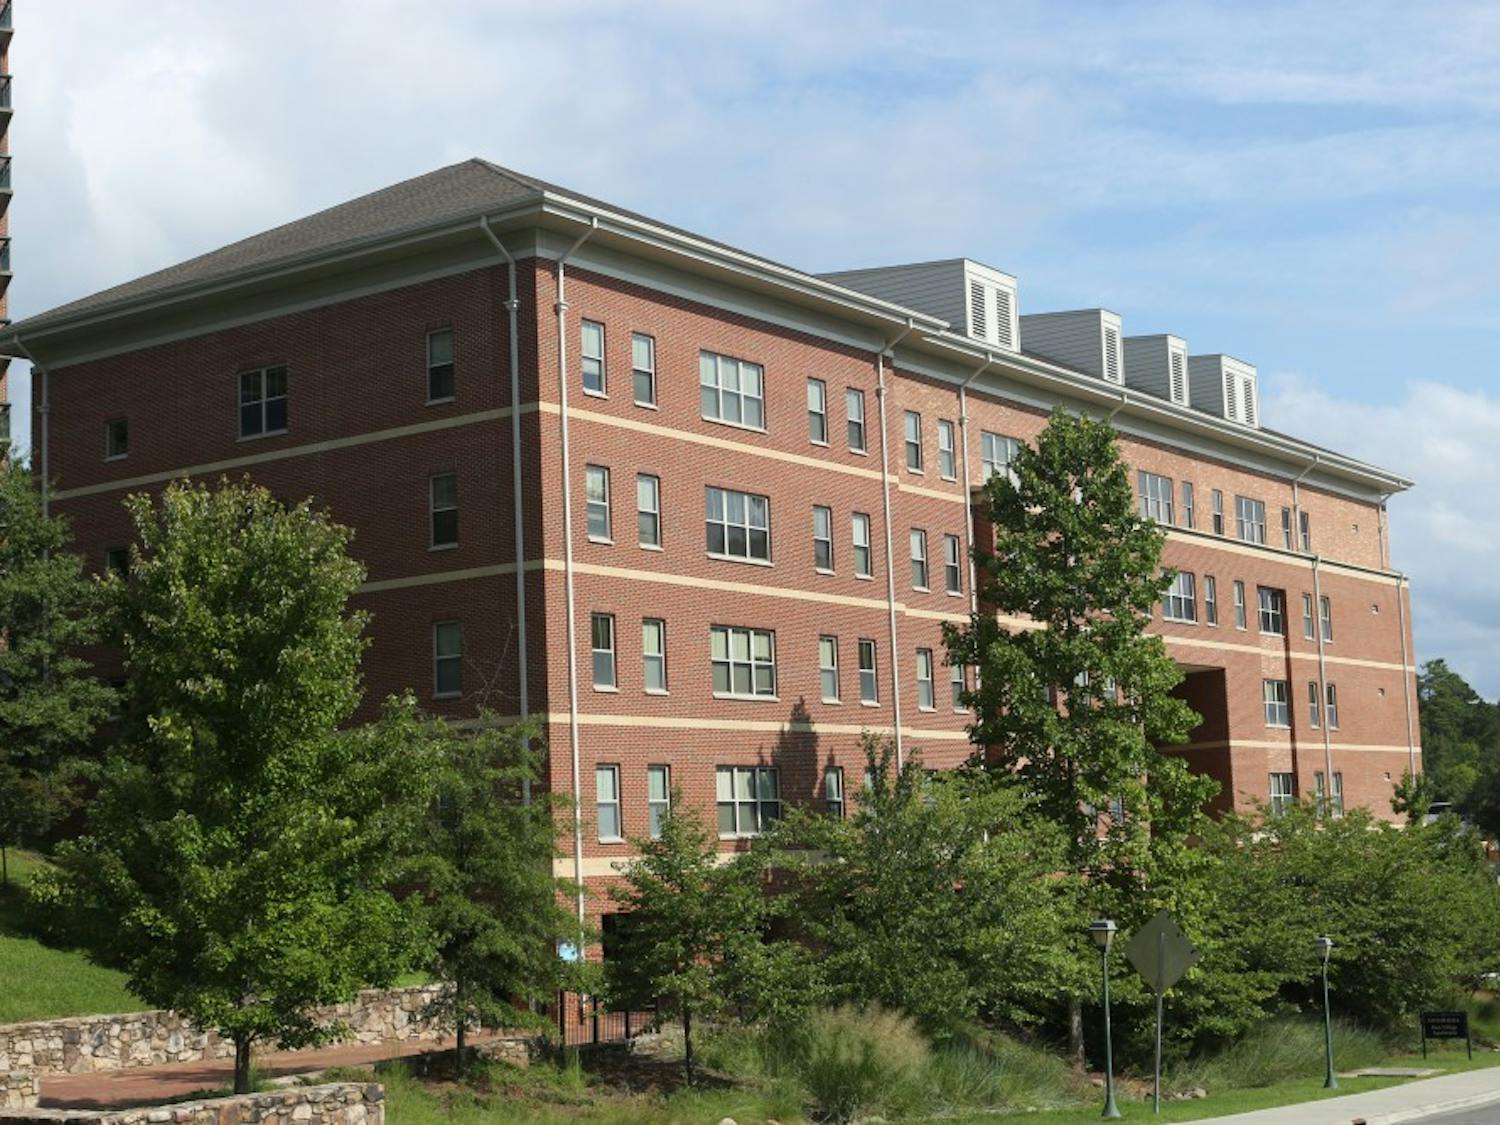 Taylor Hall, also known as Ram Village 4 is a residence hall that is located on South Campus behind the First Year dorm, Hinton James. This is one of the five buildings that makes up the Ram Village Community.i